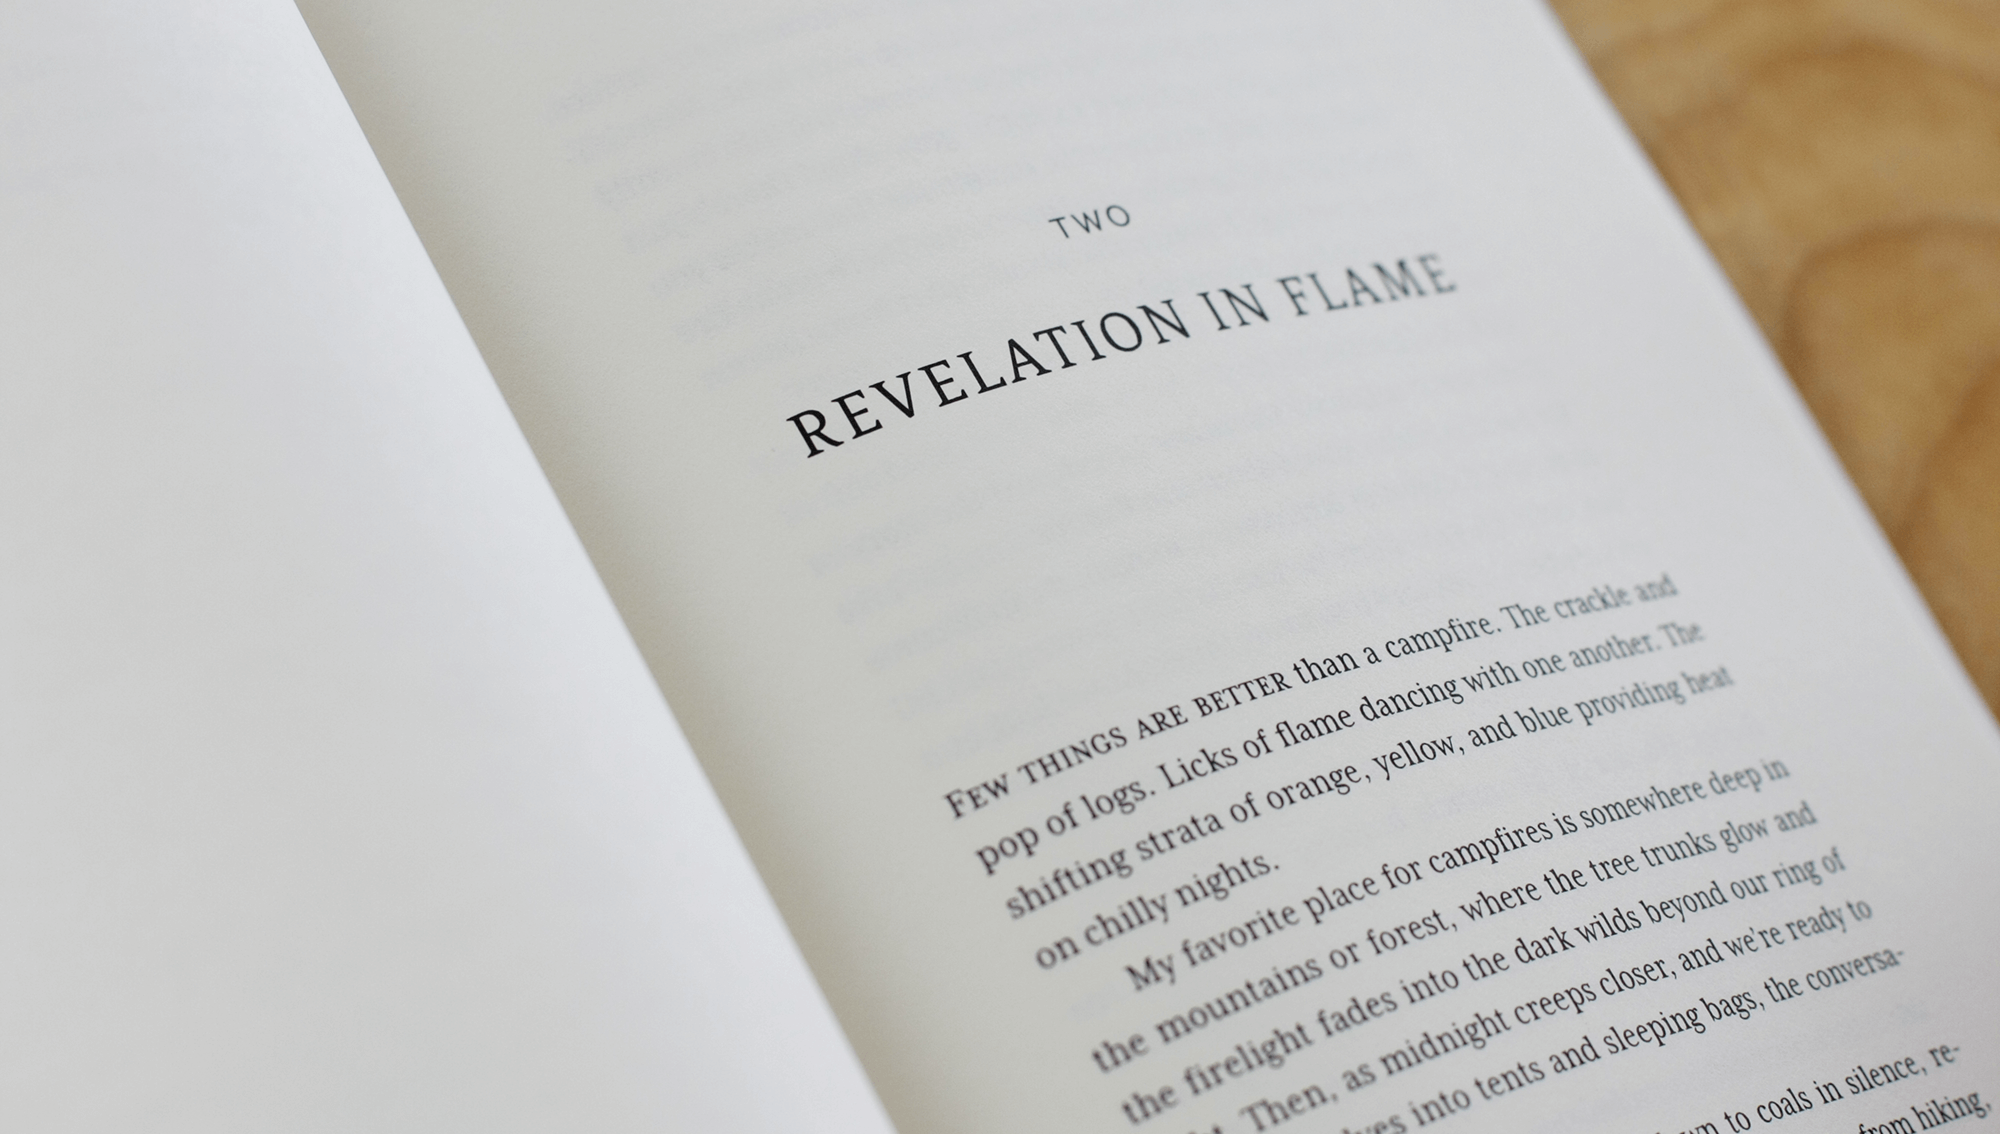 Chapter open–Revelation in flame